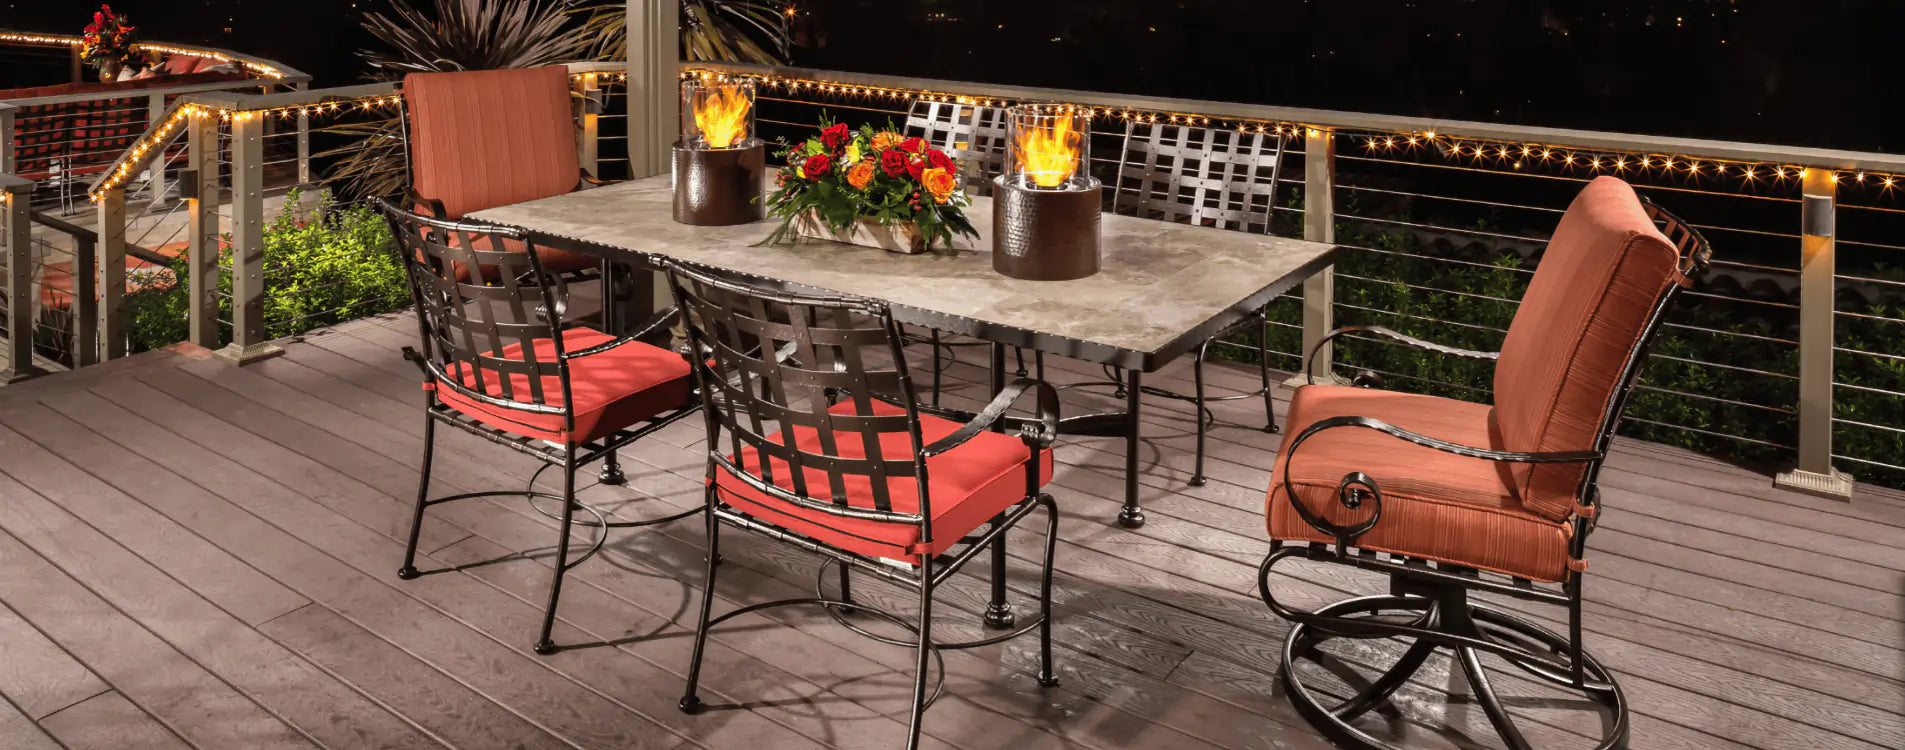 Wrought iron patio furniture table and chairs